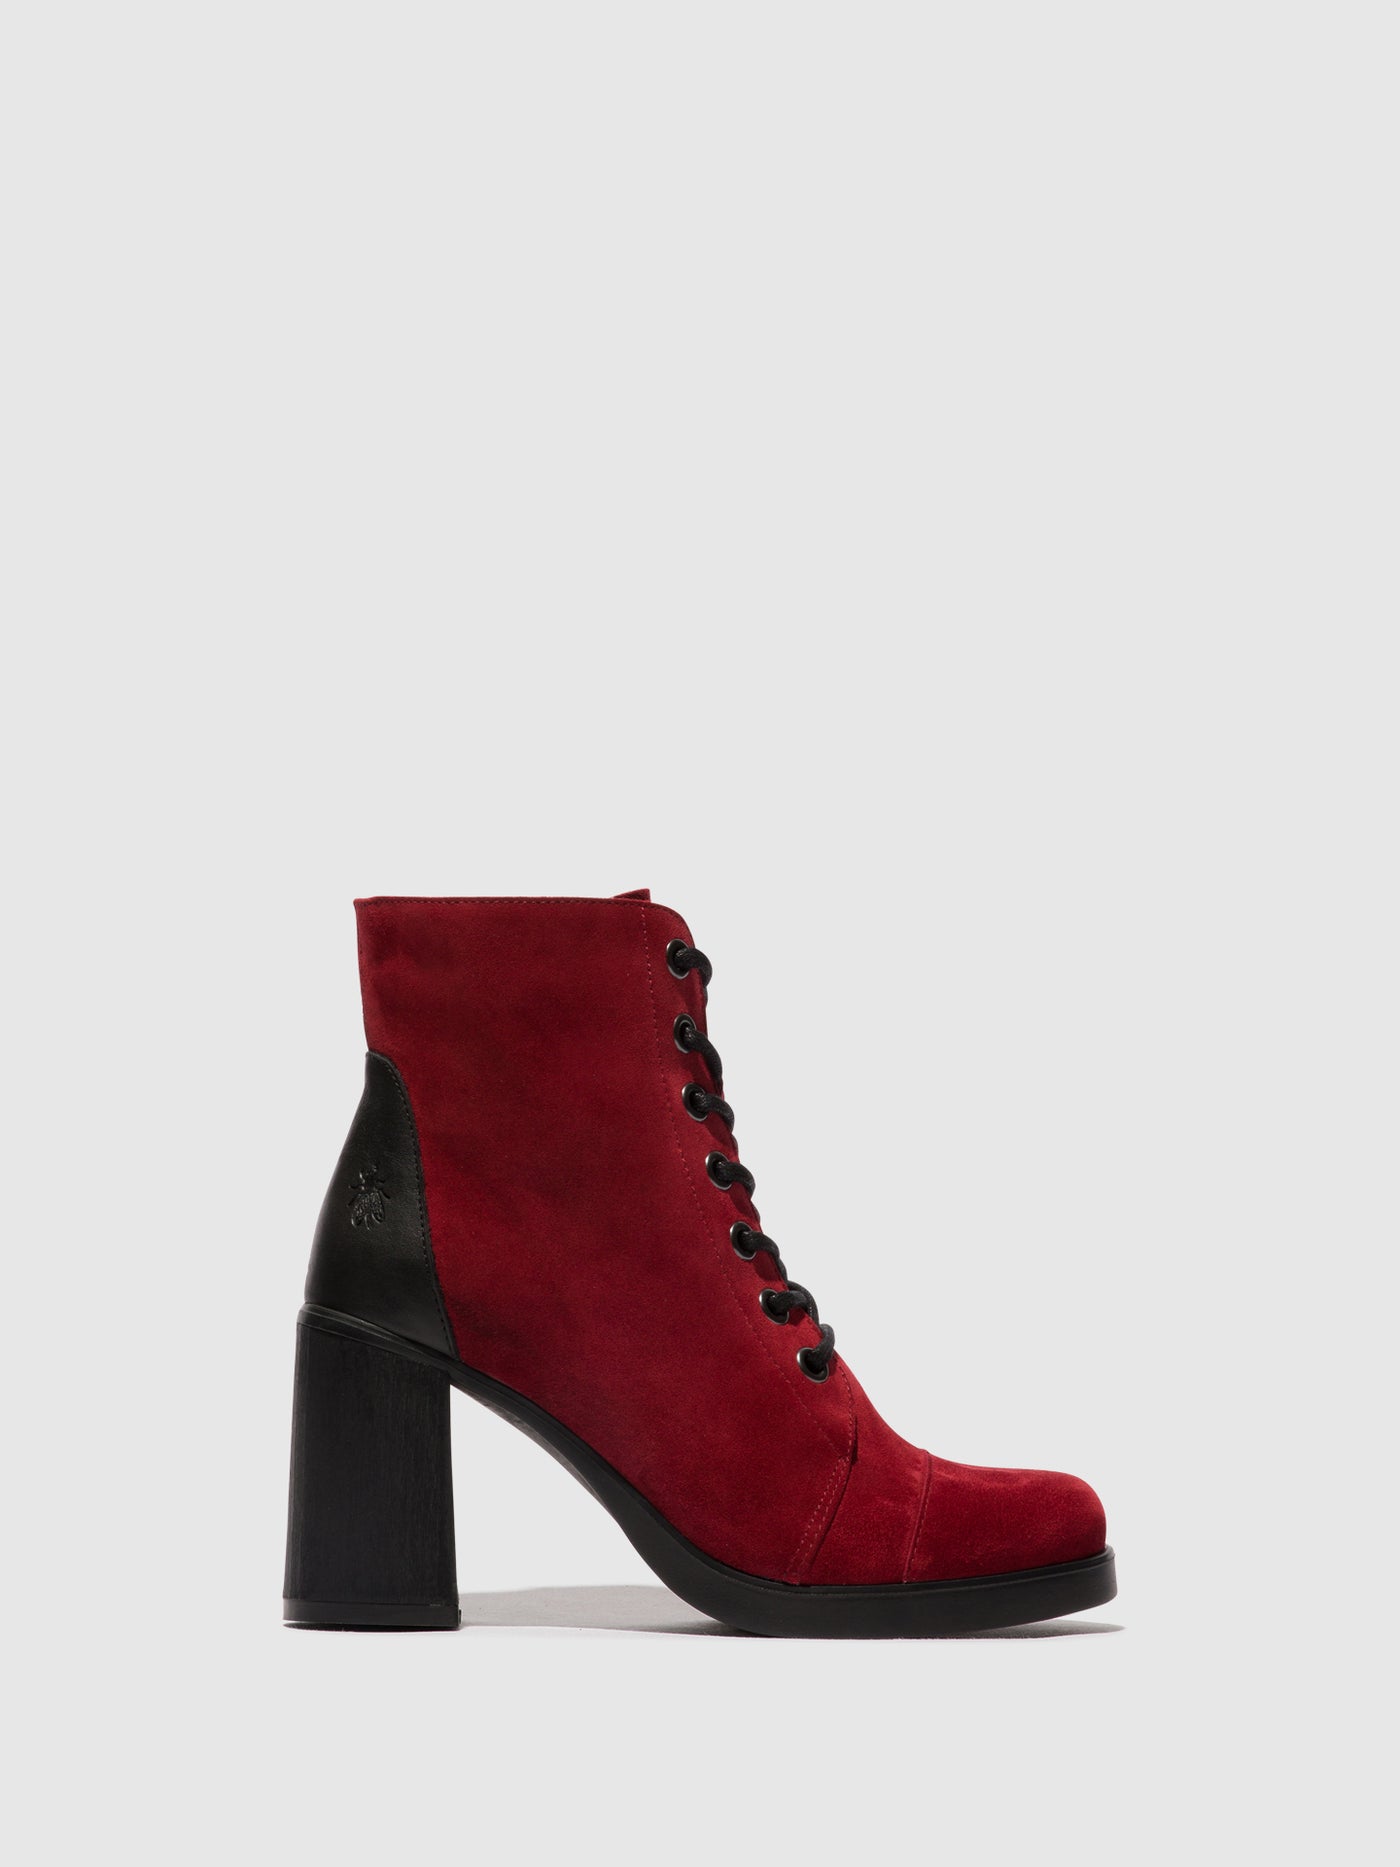 Lace-up Ankle Boots SONY989FLY WINE/BLACK